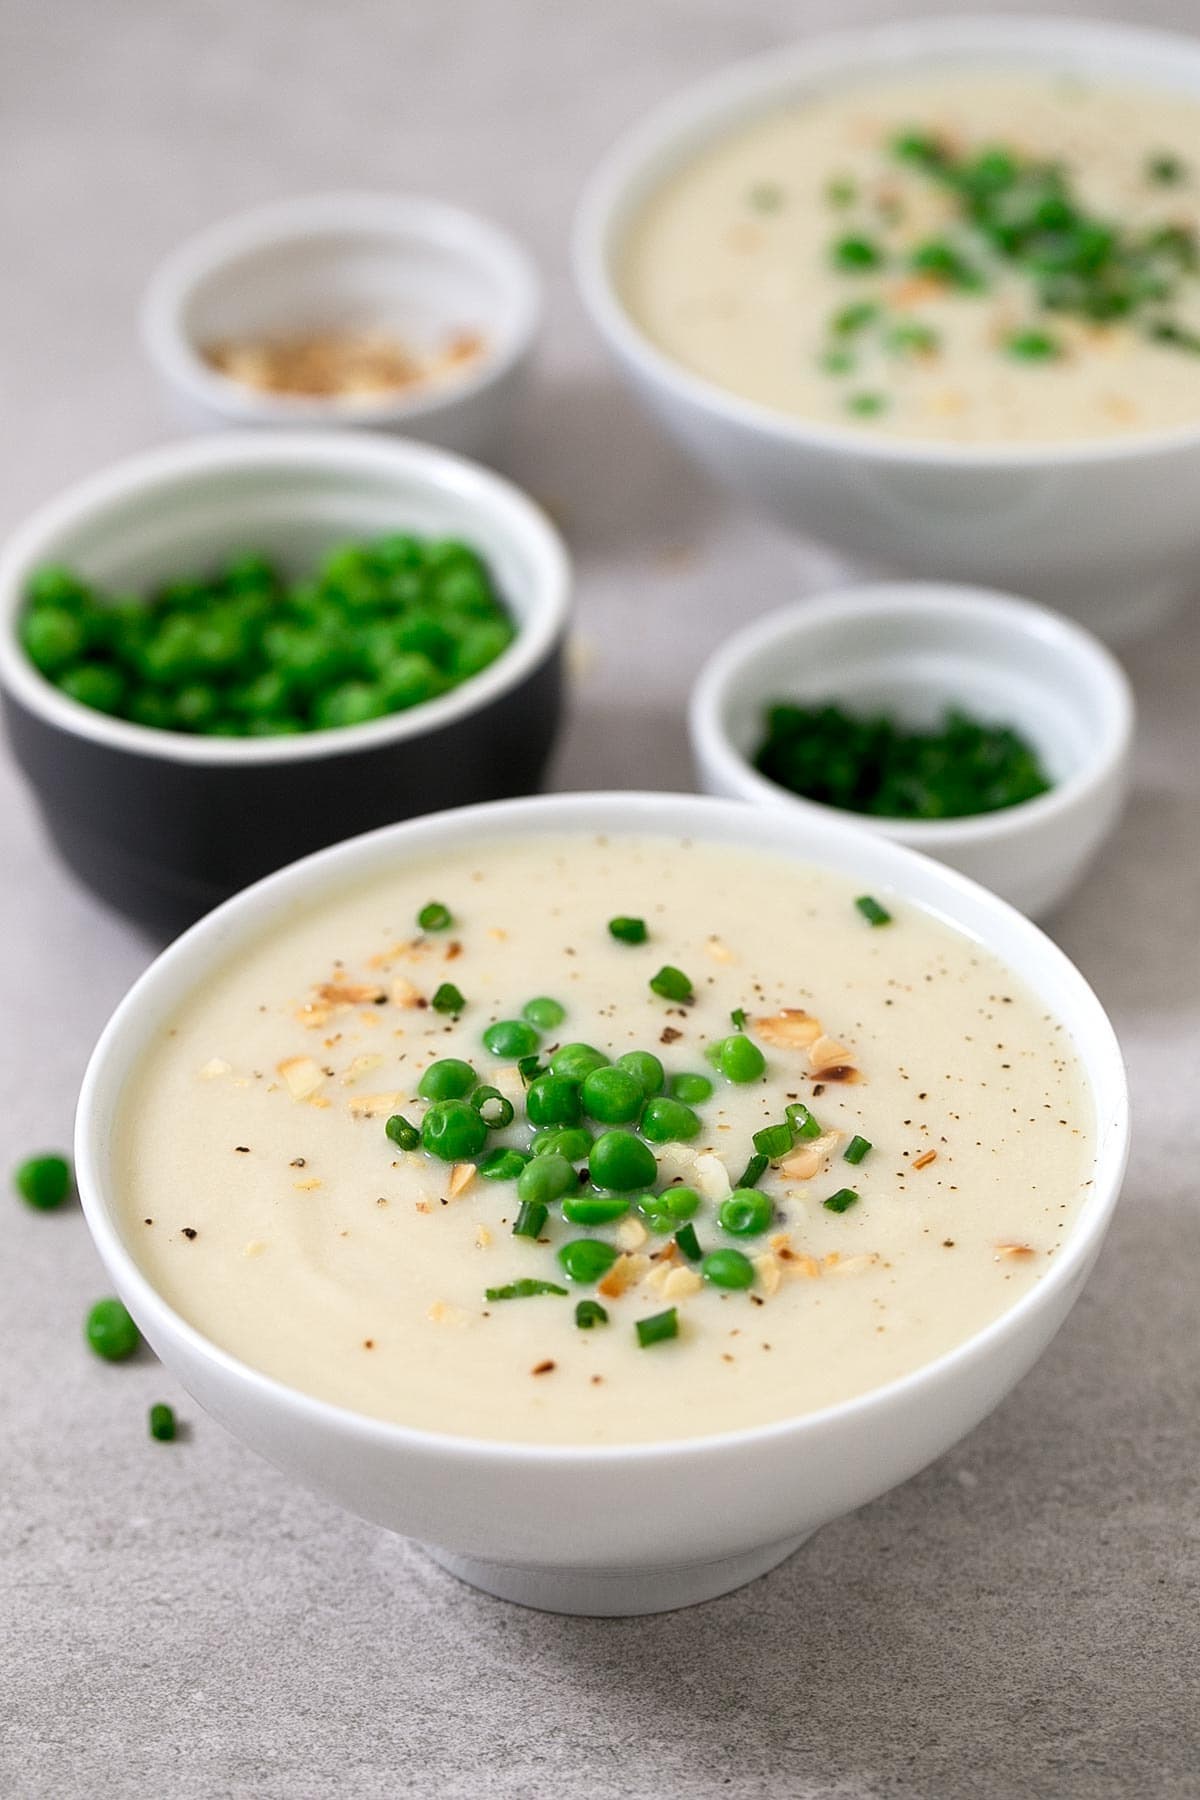 Bowls of homemade Vegan Cauliflower Soup with green peas on top